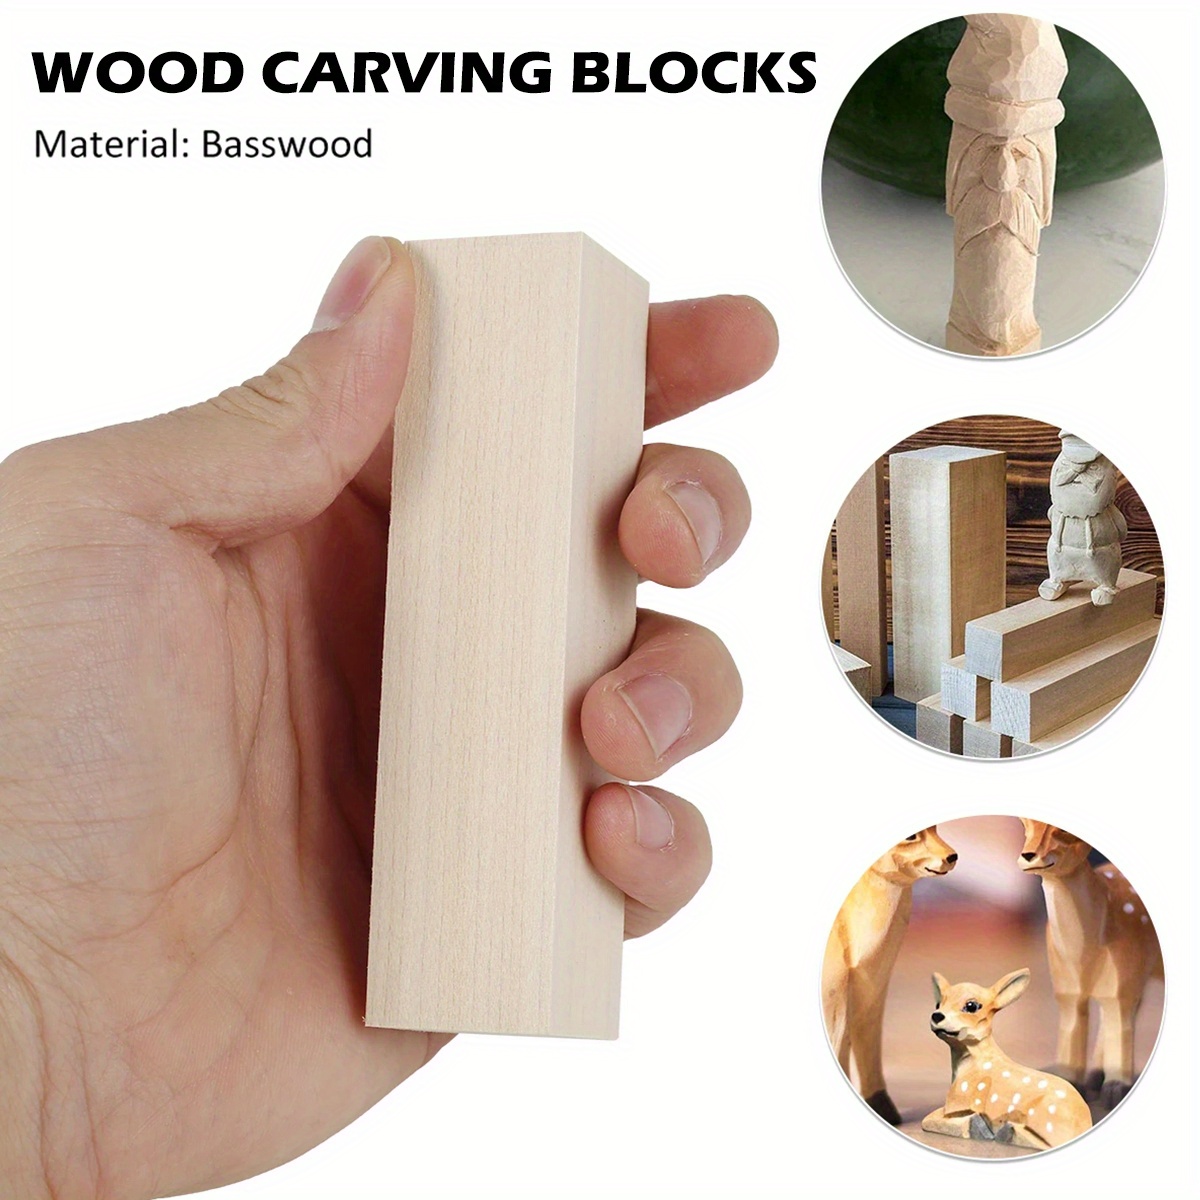 WOWOSS 8 Pack Unfinished Basswood Carving Blocks Kit, Premium Kiln Dried Whittling Soft Wood Carving Block Hobby Set for Kids Adults Beginner to Exper